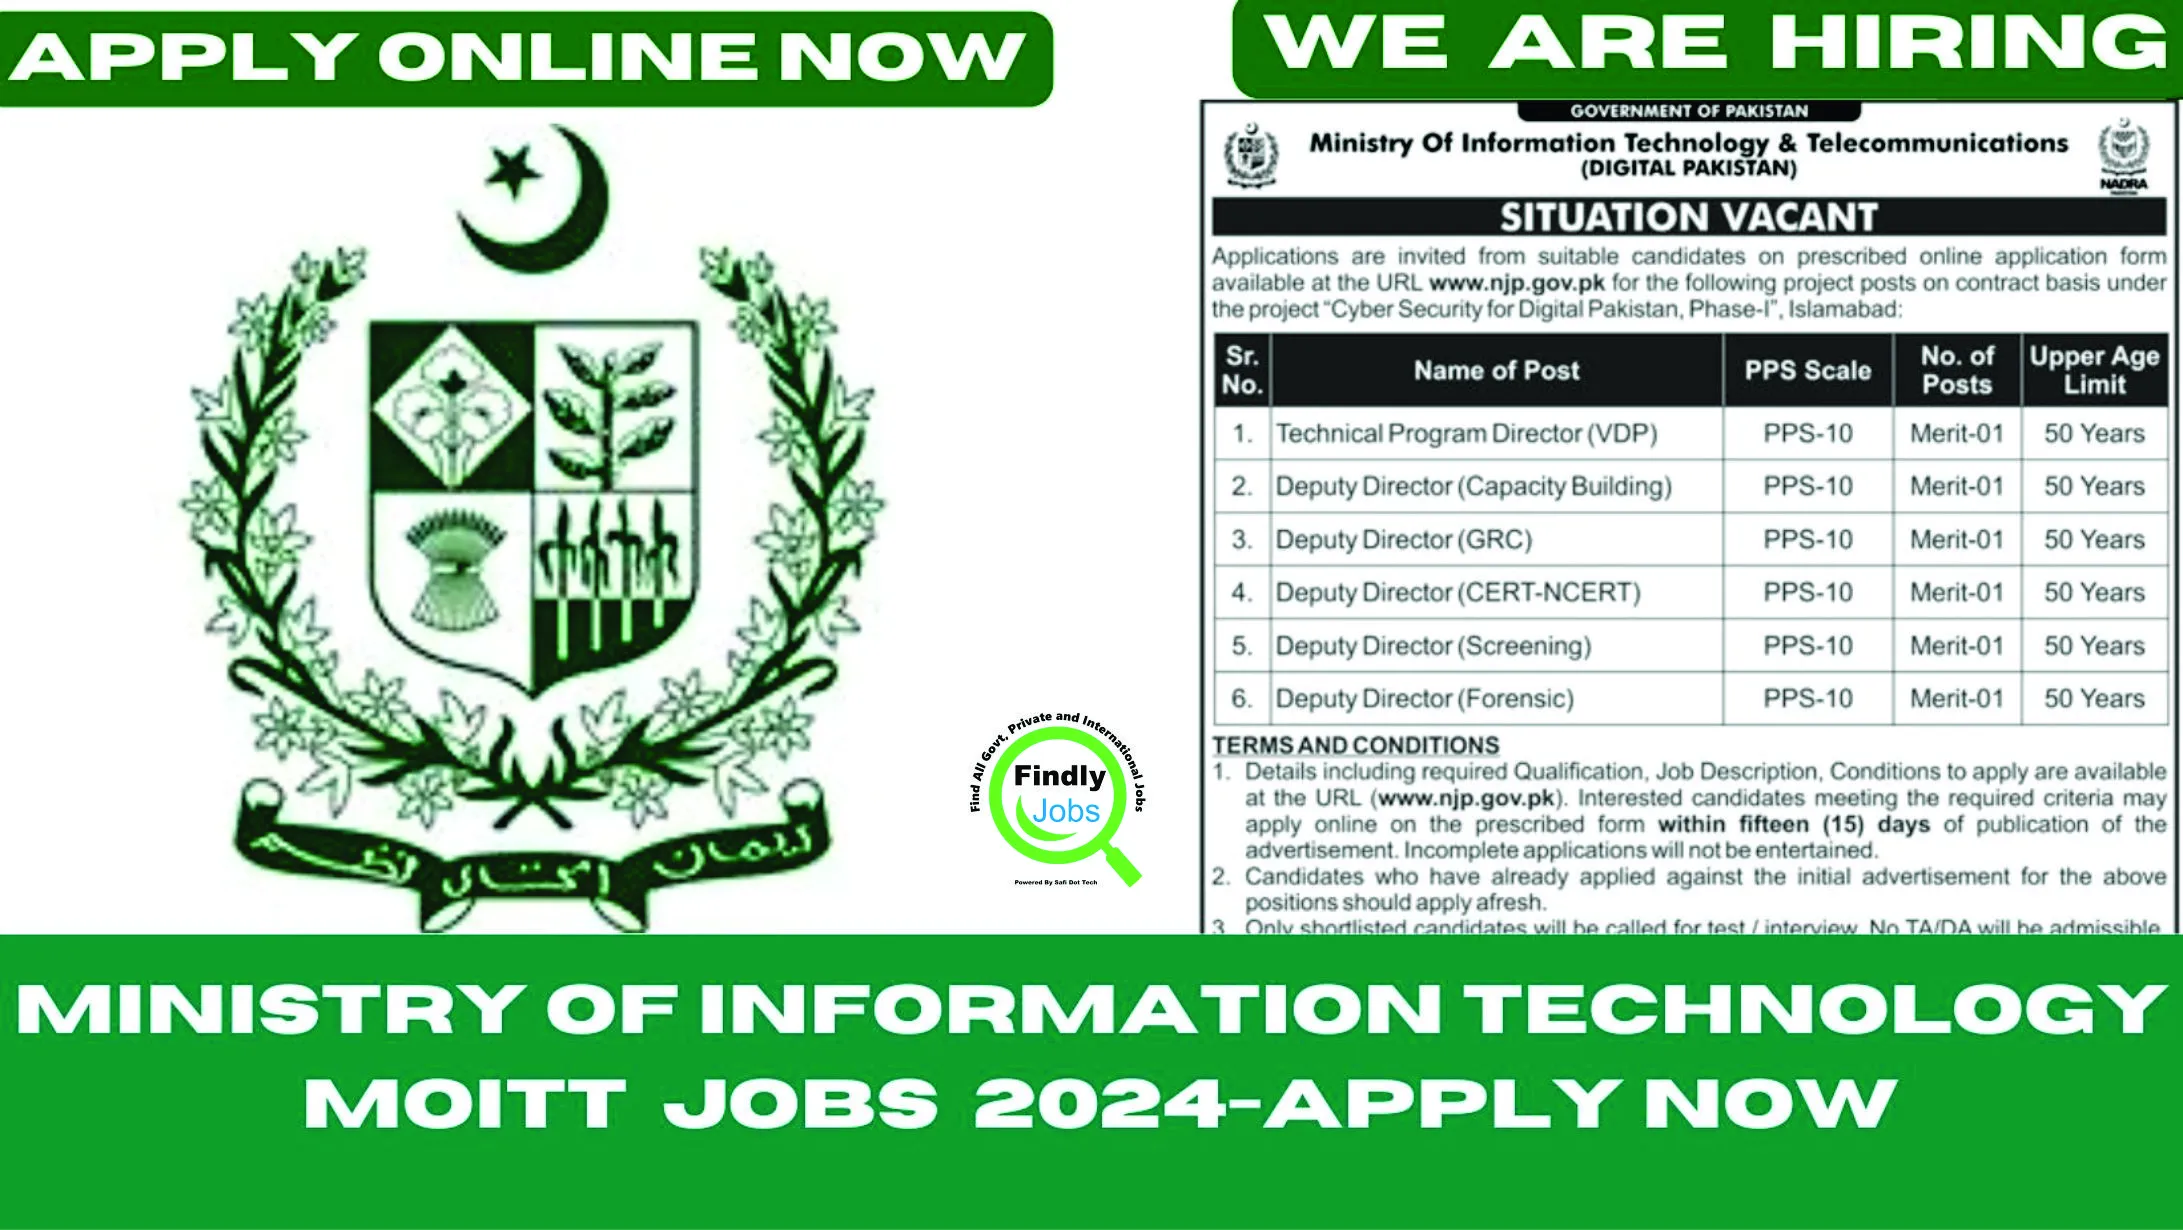 Ministry of Information Technology Jobs 2024 - FindlyJobs